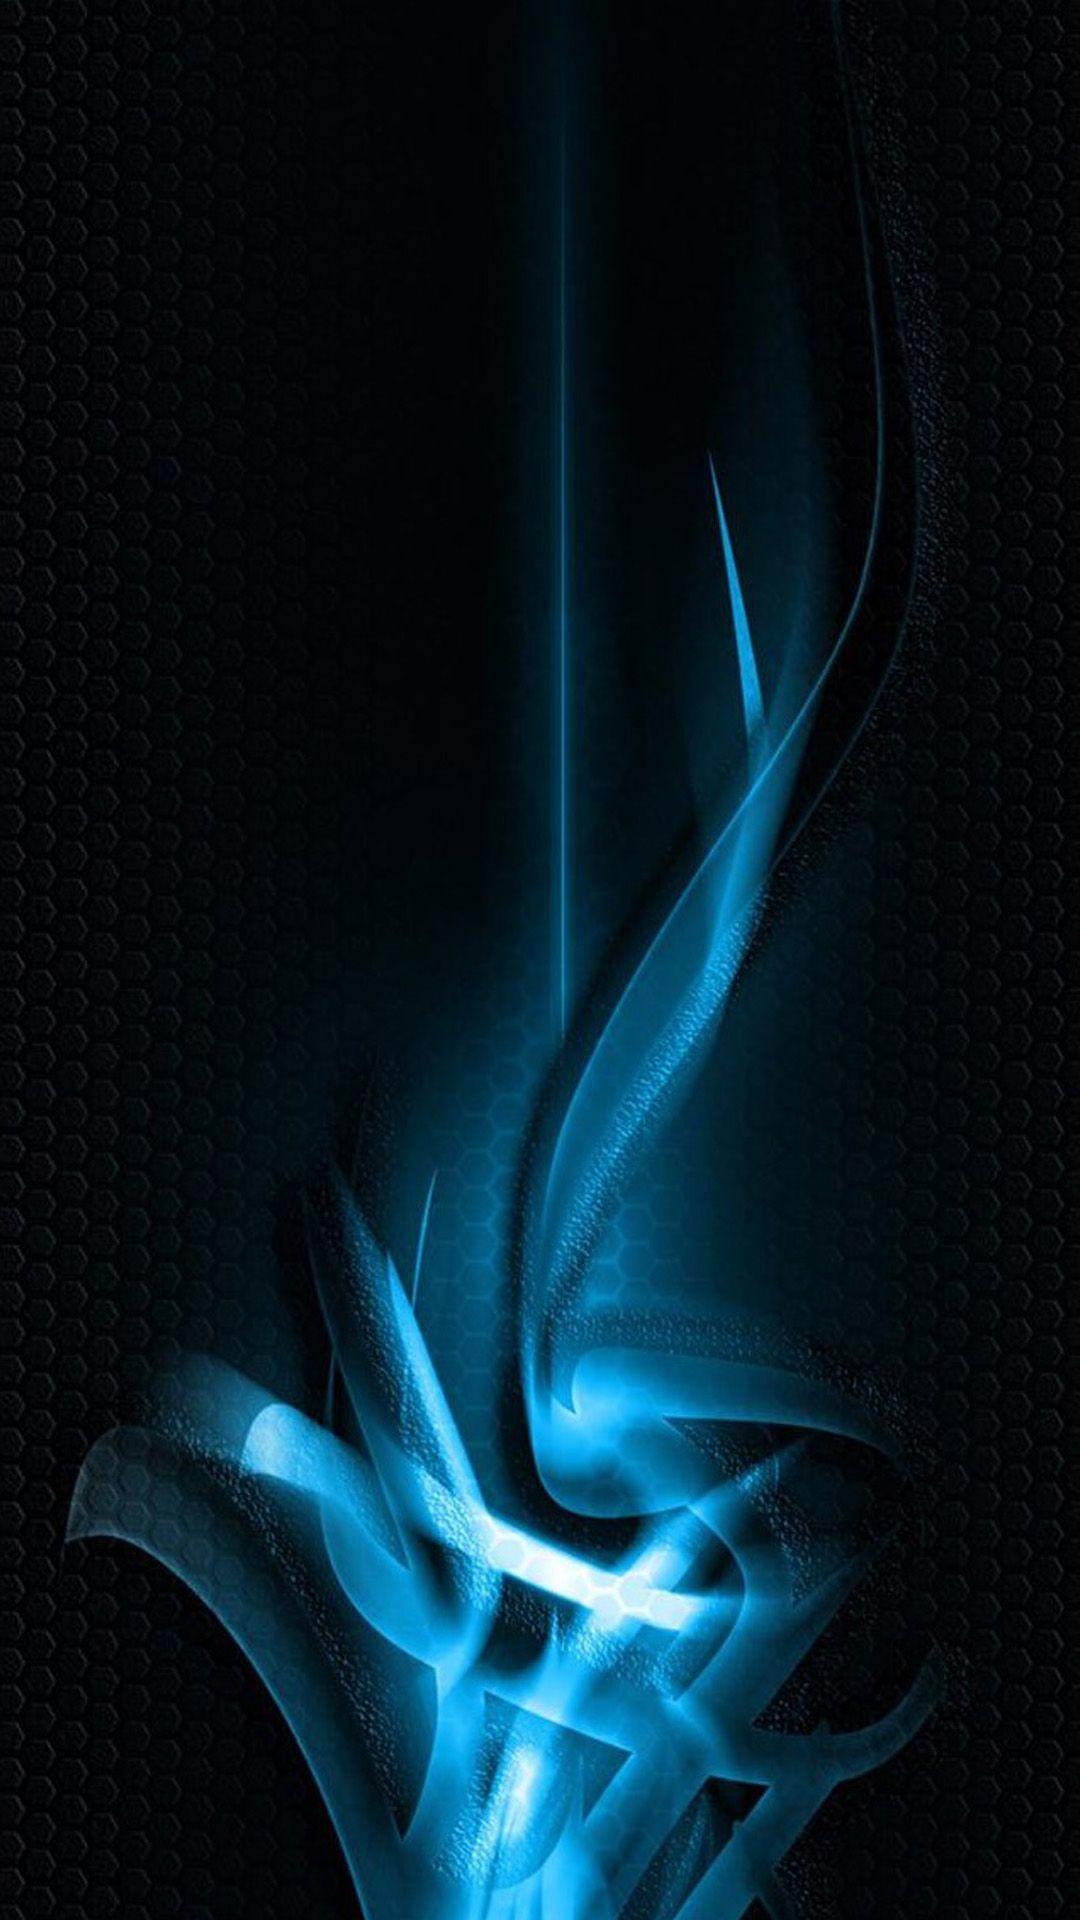 Cool Abstract iPhone Wallpaper image. iPhone dynamic